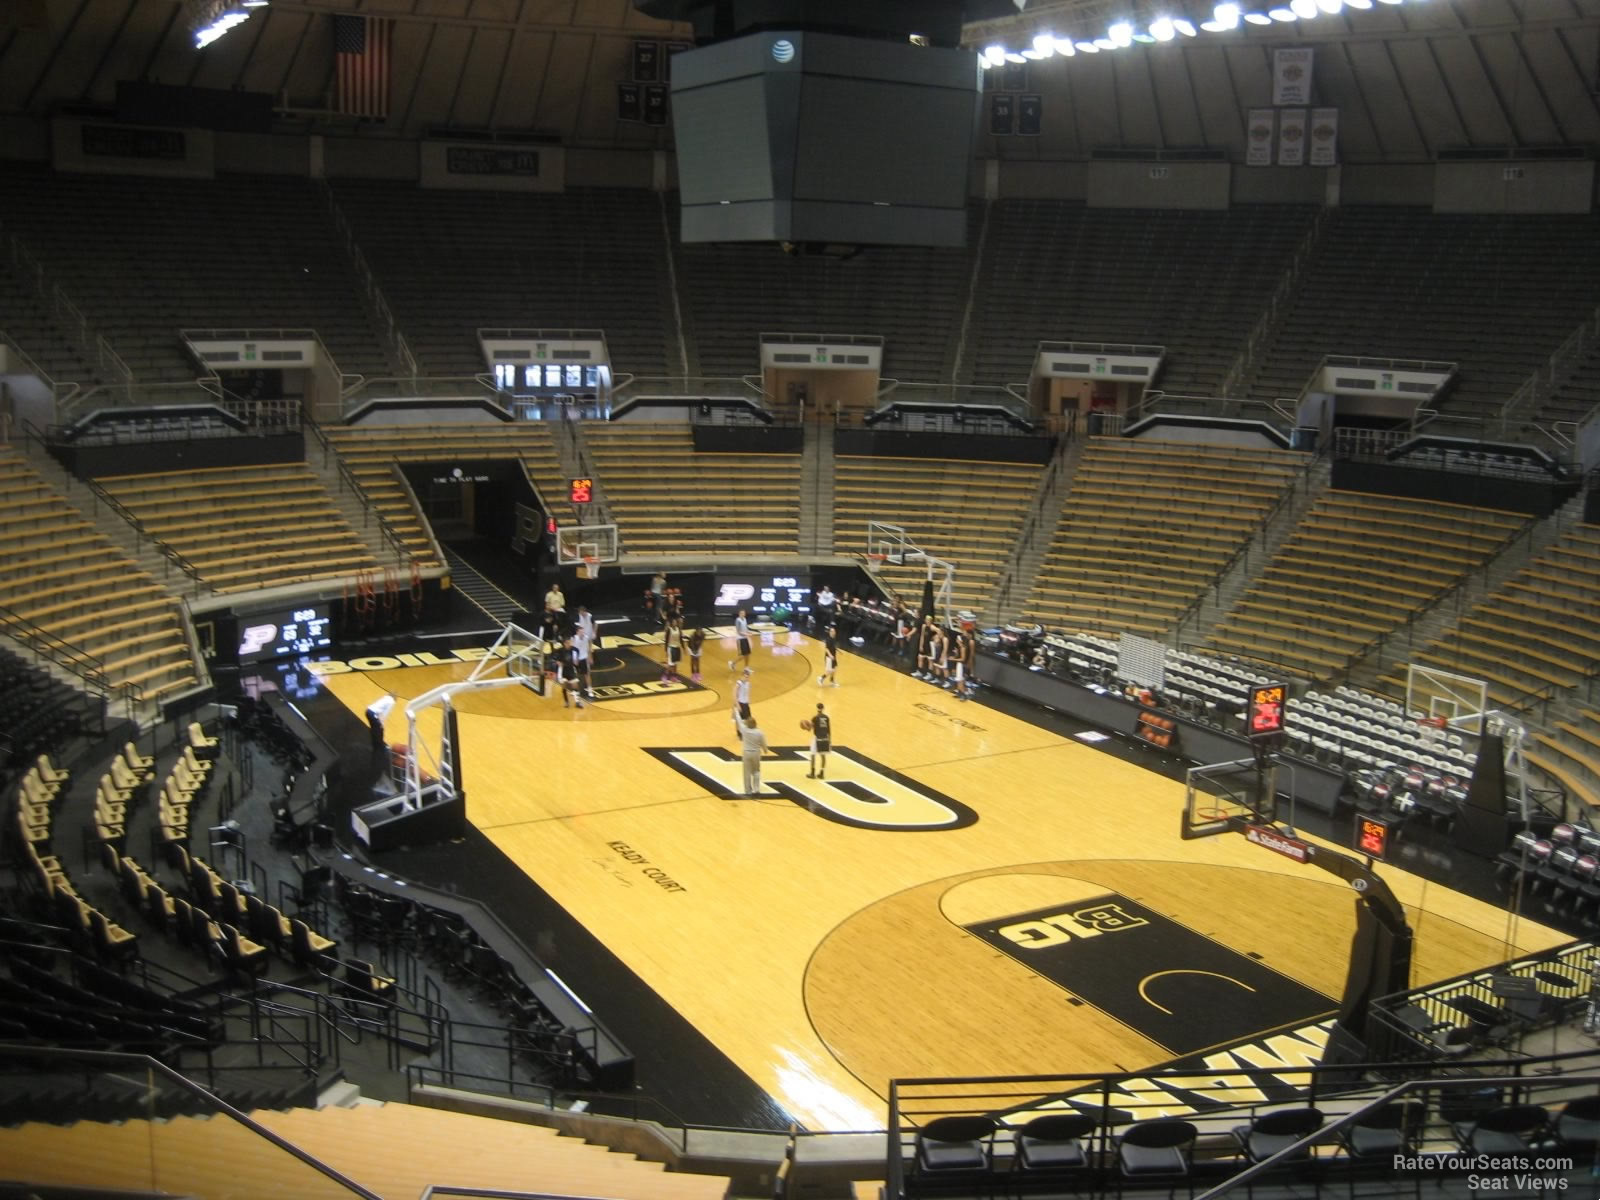 section 108, row 10 seat view  - mackey arena